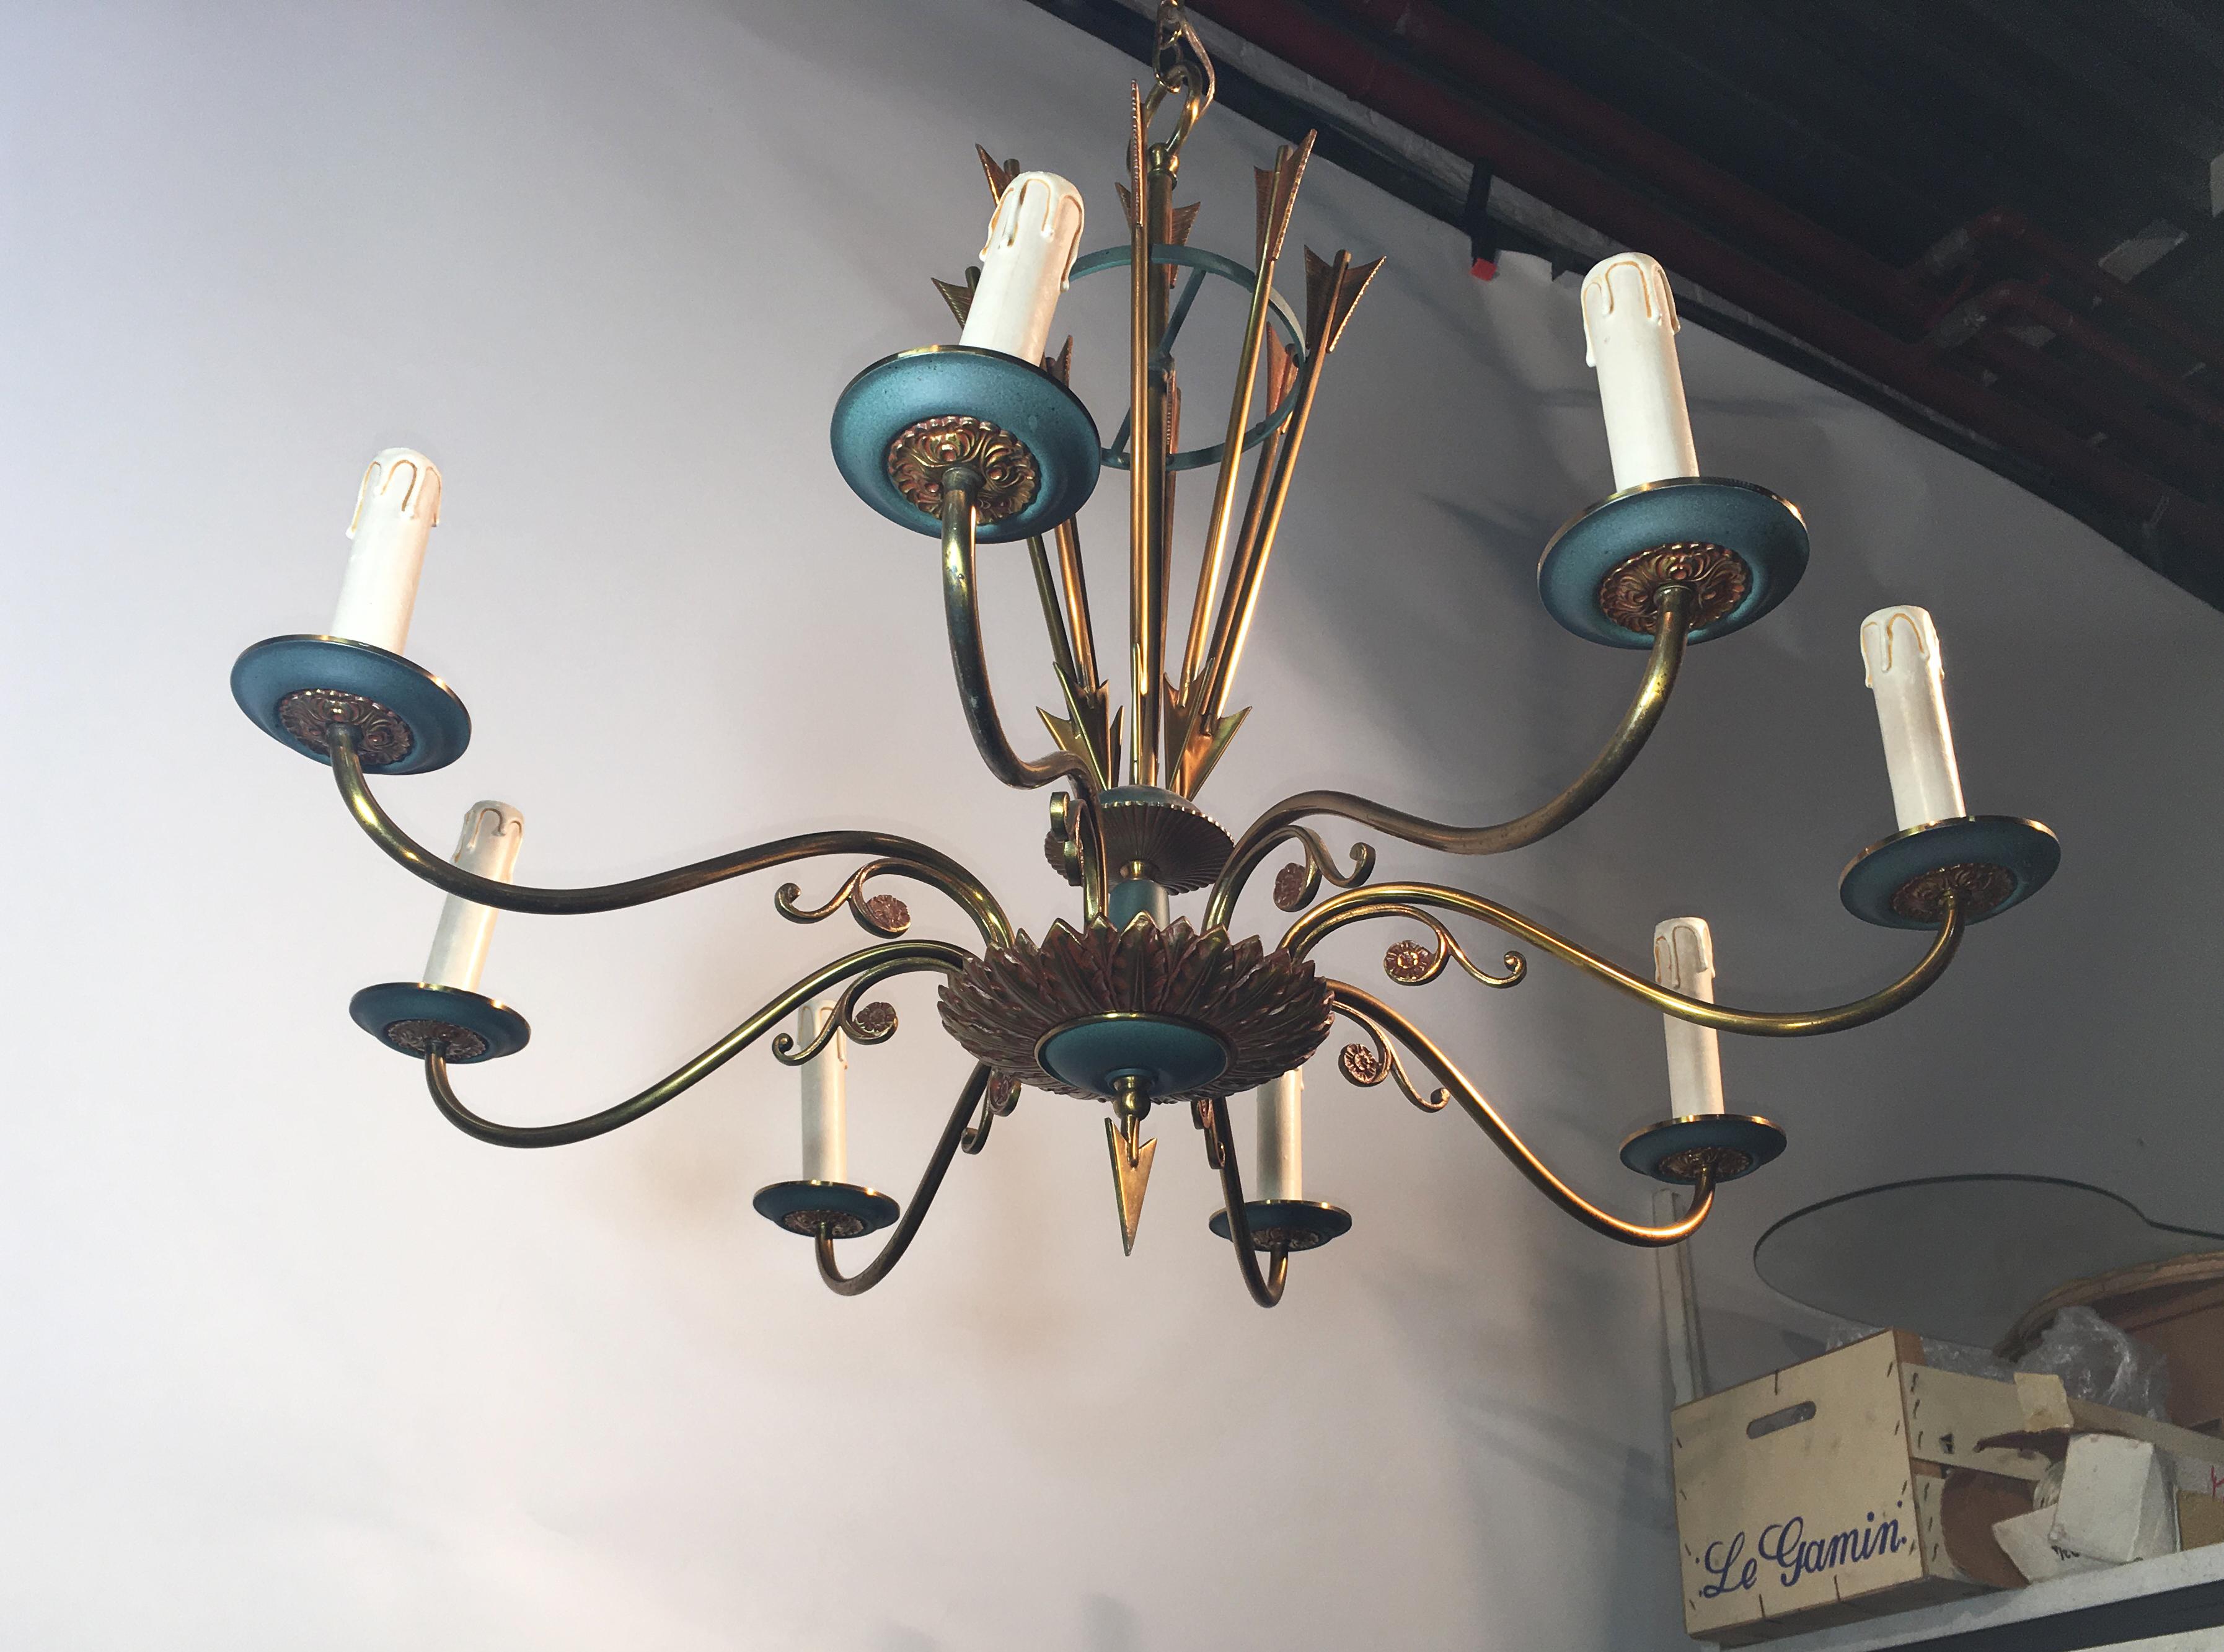 Chandelier in lacquered metal and brass, circa 1950.
Measures: H 110 cm x D 76 cm with the chain
H 70 cm x D 76 cm without the chain.